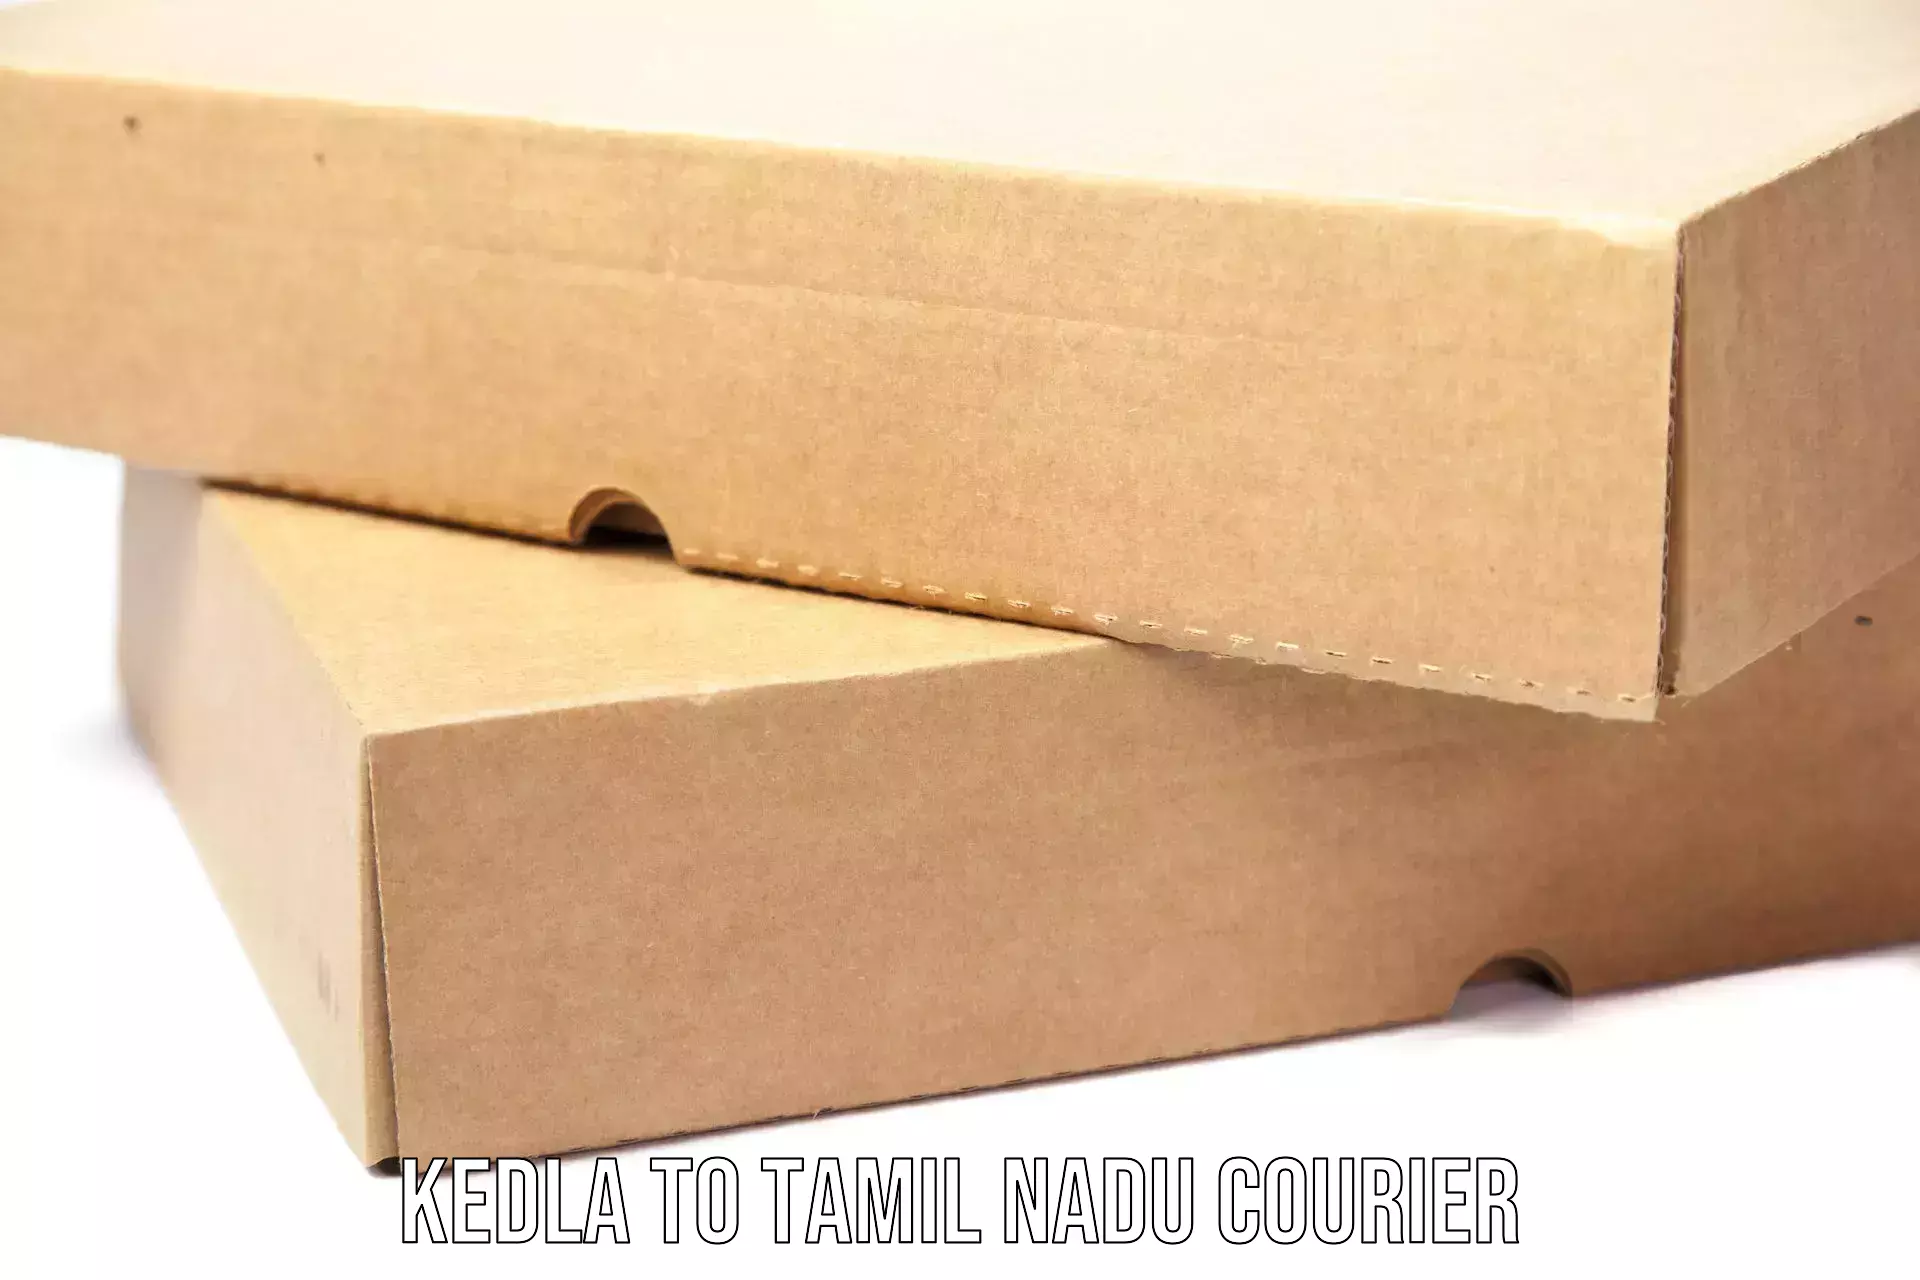 Easy access courier services Kedla to Tiruchengodu